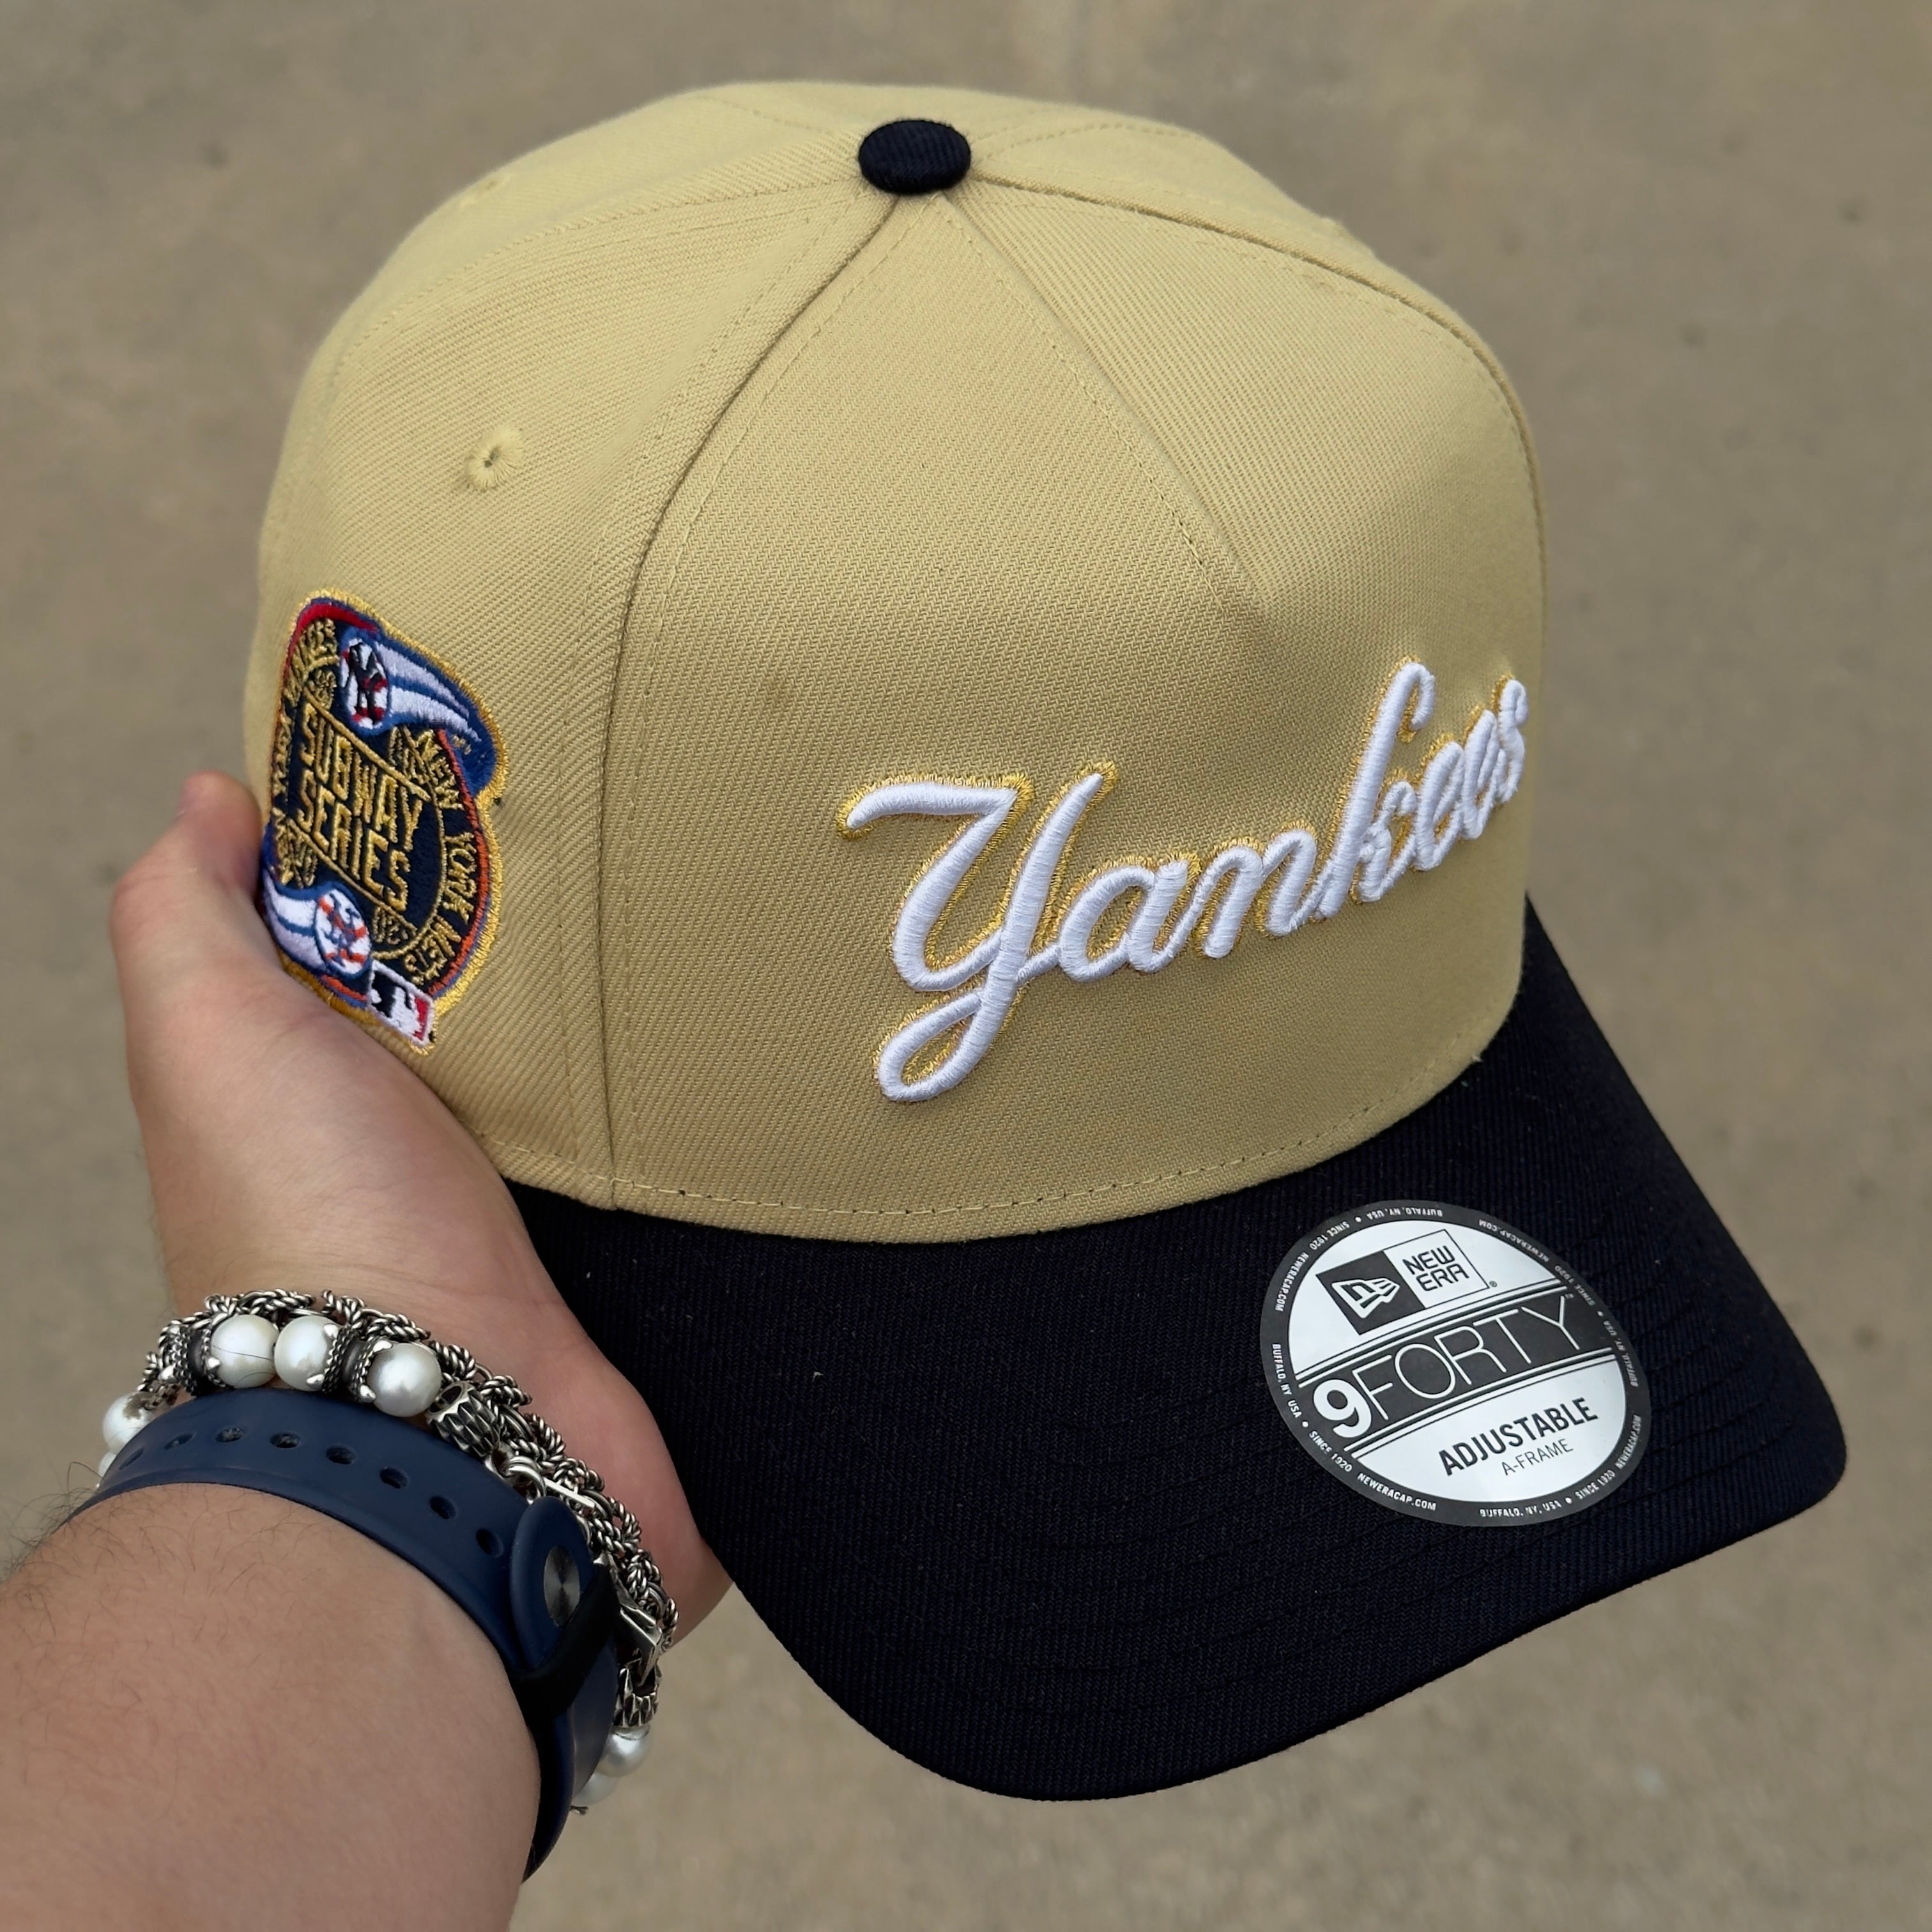 Vegas Gold New York Yankees Subway Series New Era 9Forty Adjustable One Size A-Frame